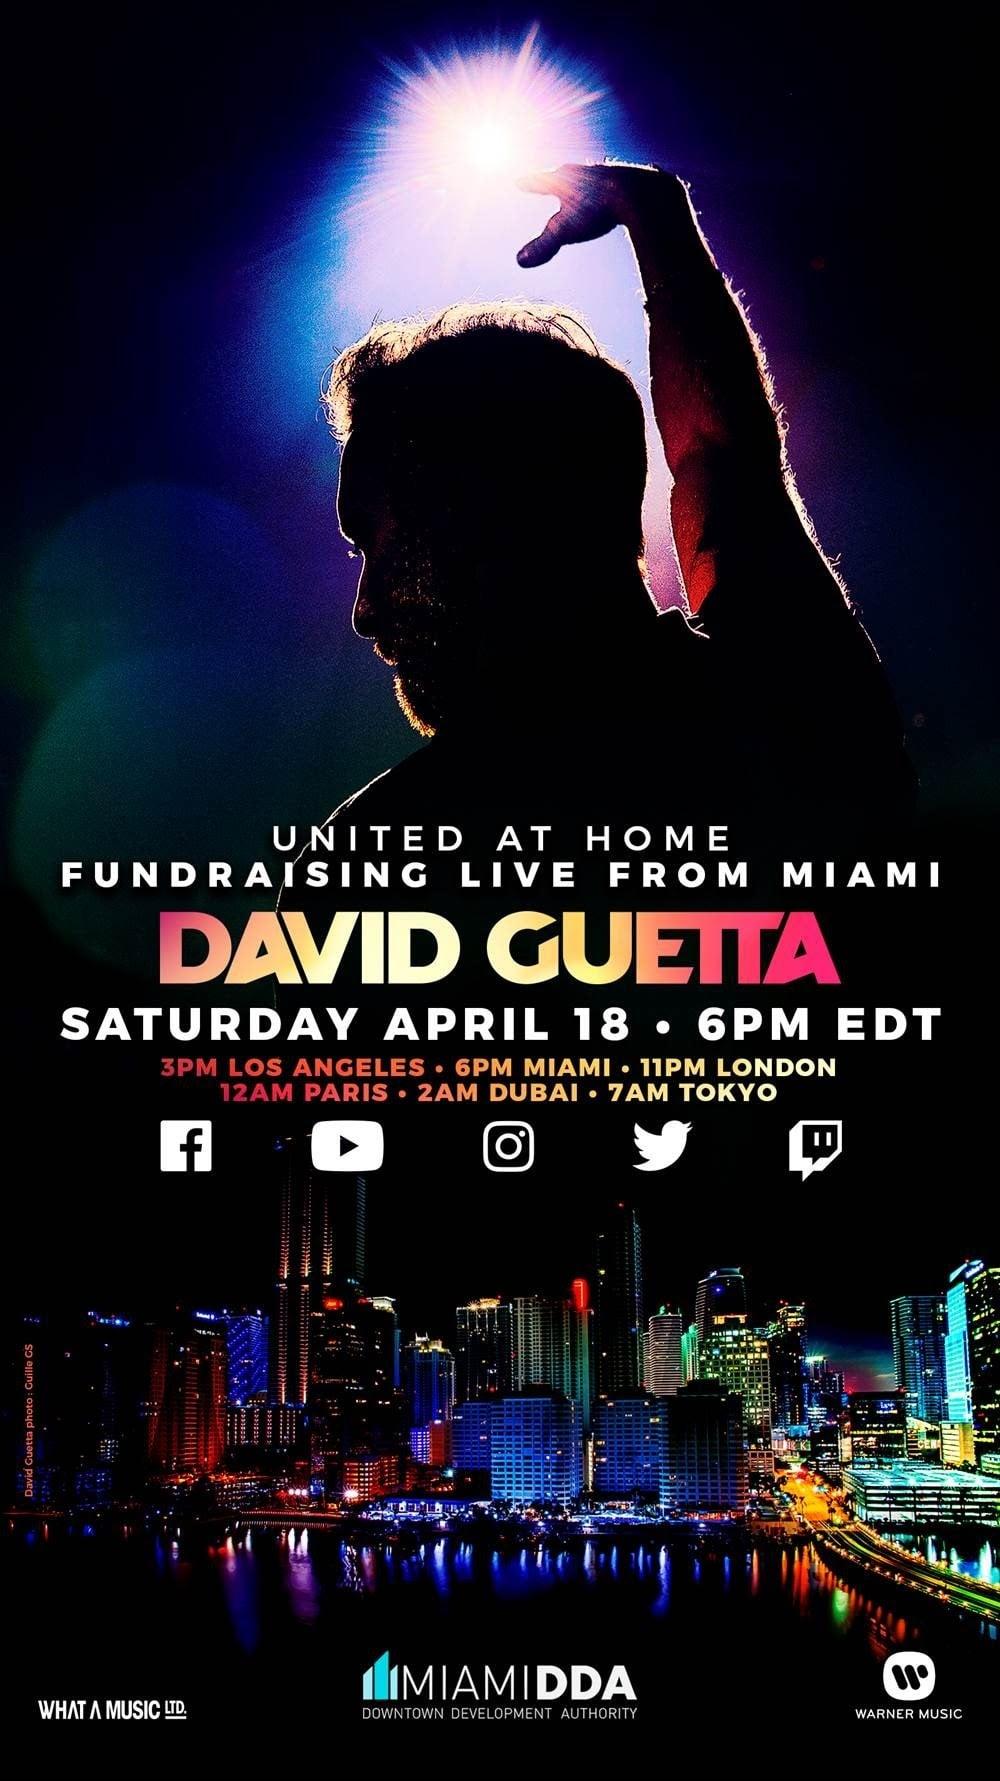 David Guetta | United at Home - Fundraising Live from Miami poster